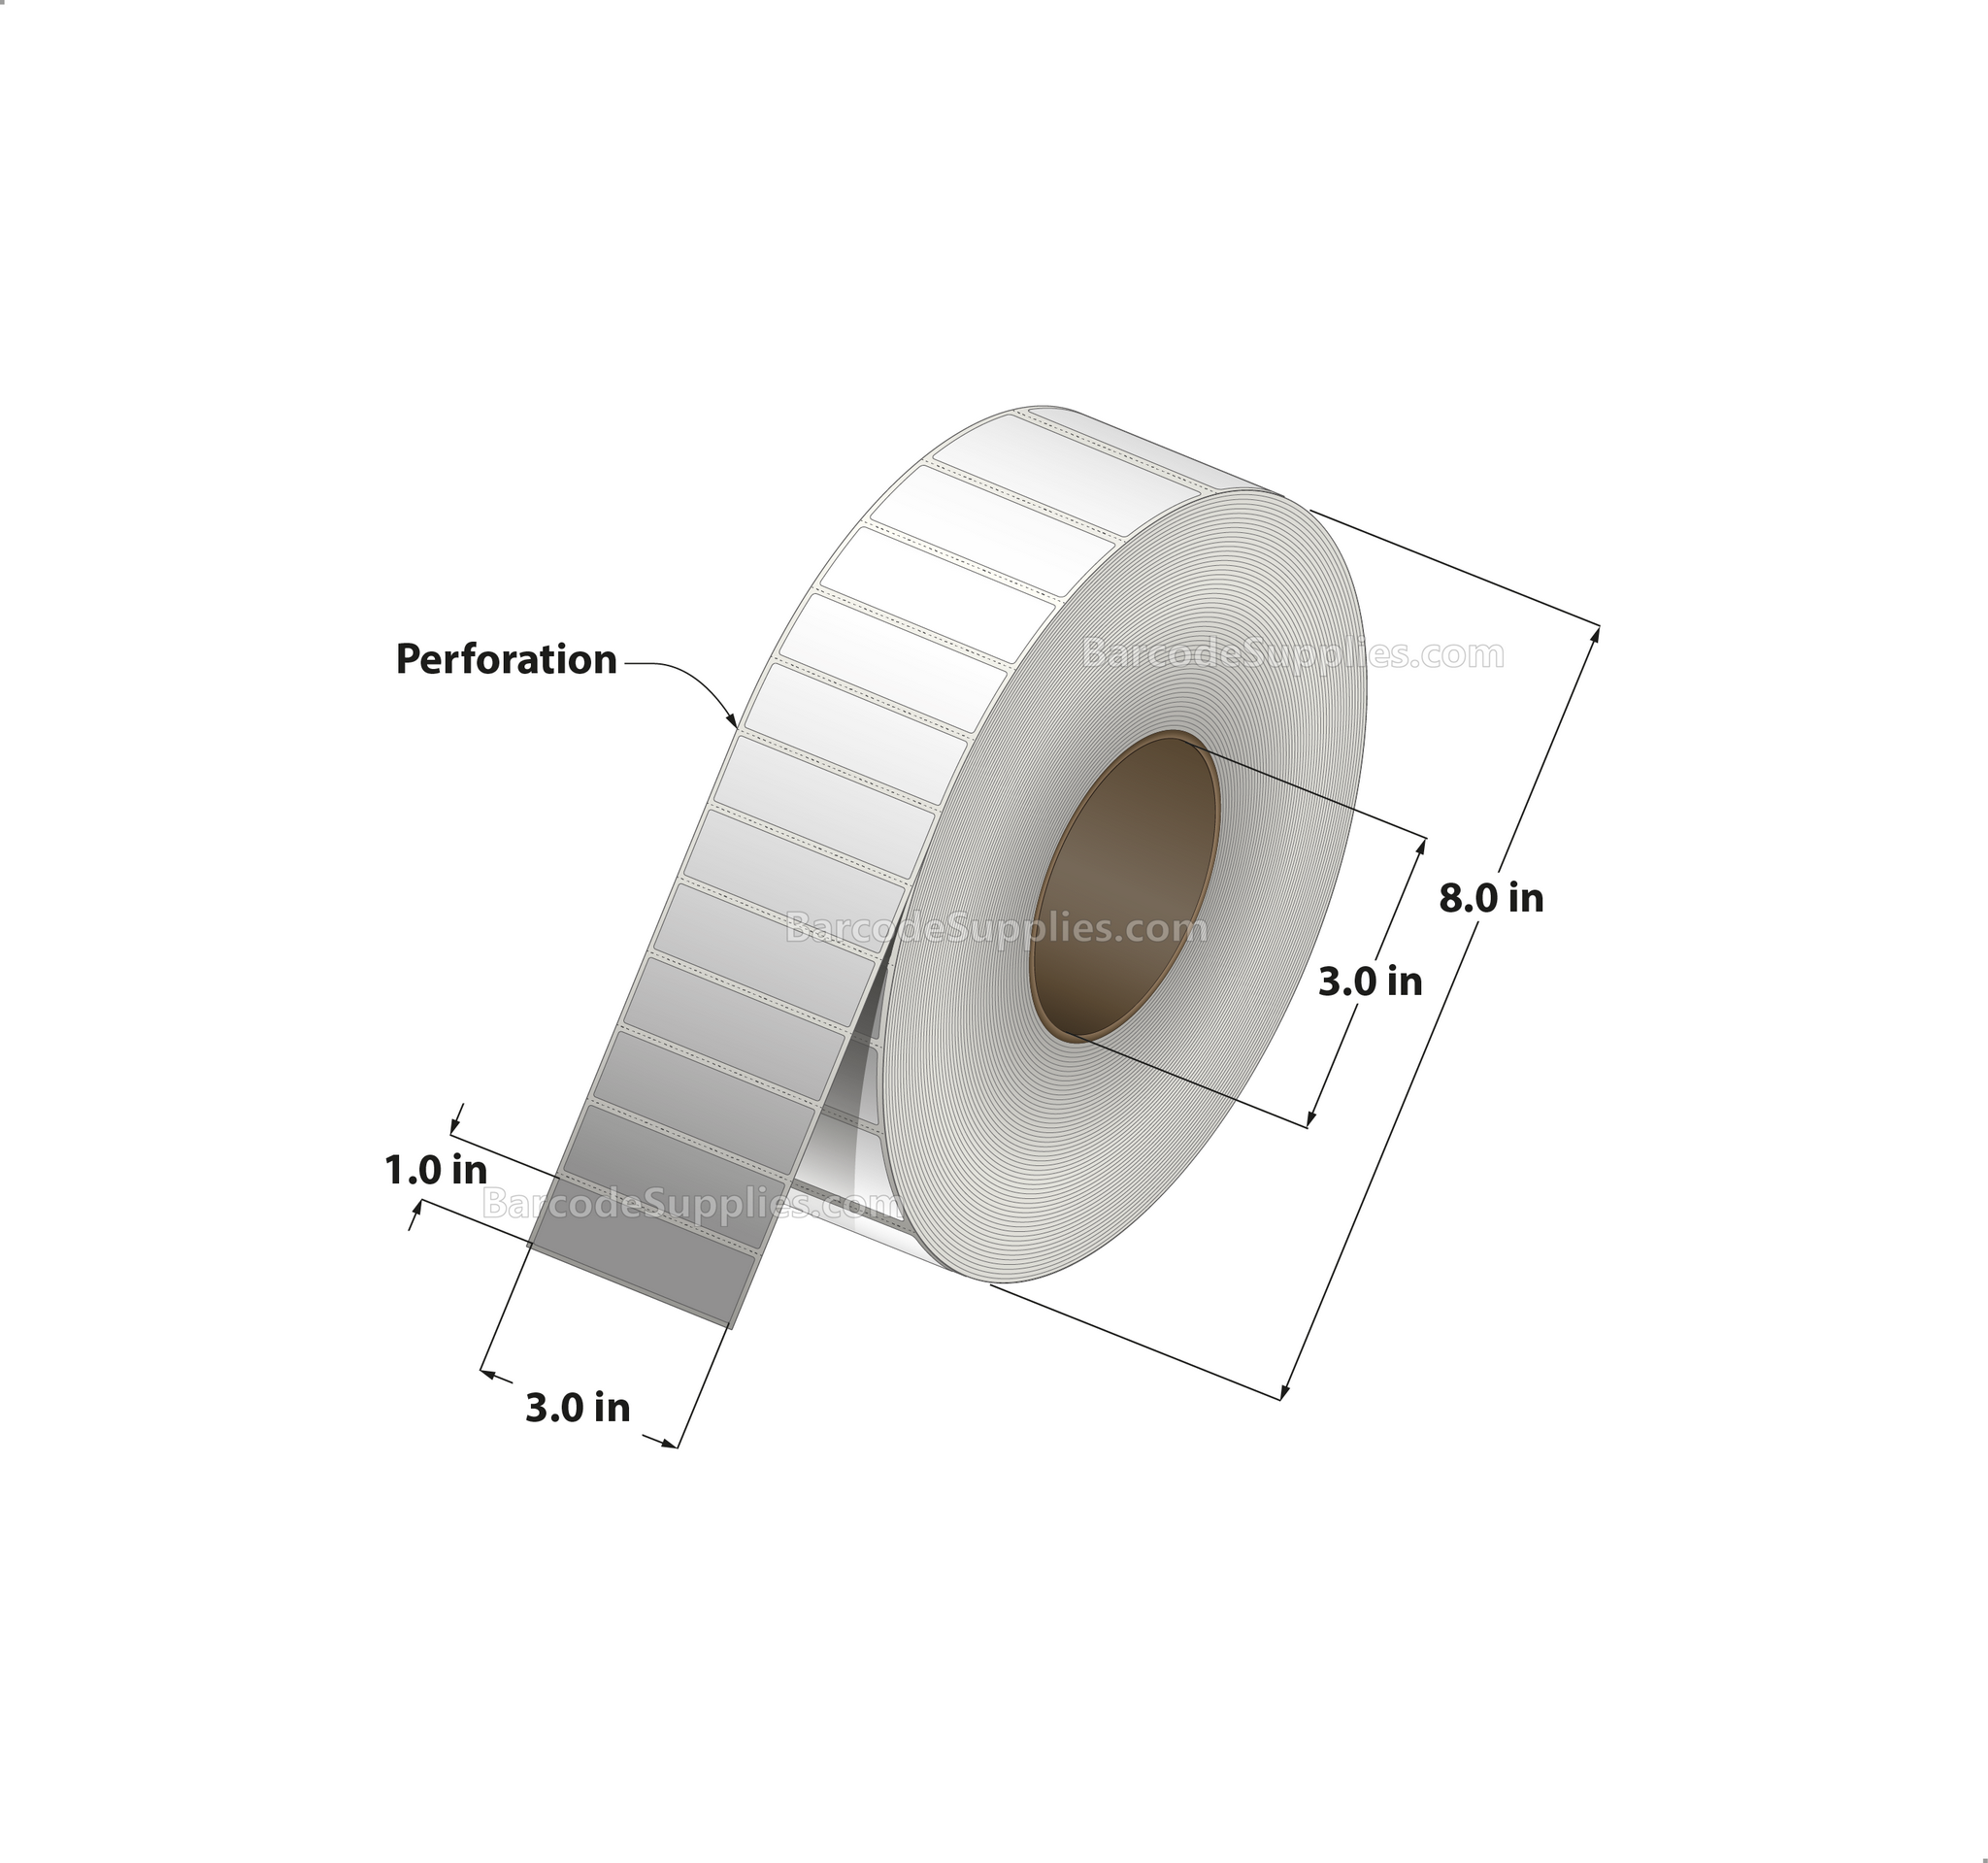 3 x 1 Thermal Transfer White Labels With Permanent Acrylic Adhesive - Perforated - 5500 Labels Per Roll - Carton Of 6 Rolls - 33000 Labels Total - MPN: TH31-1P